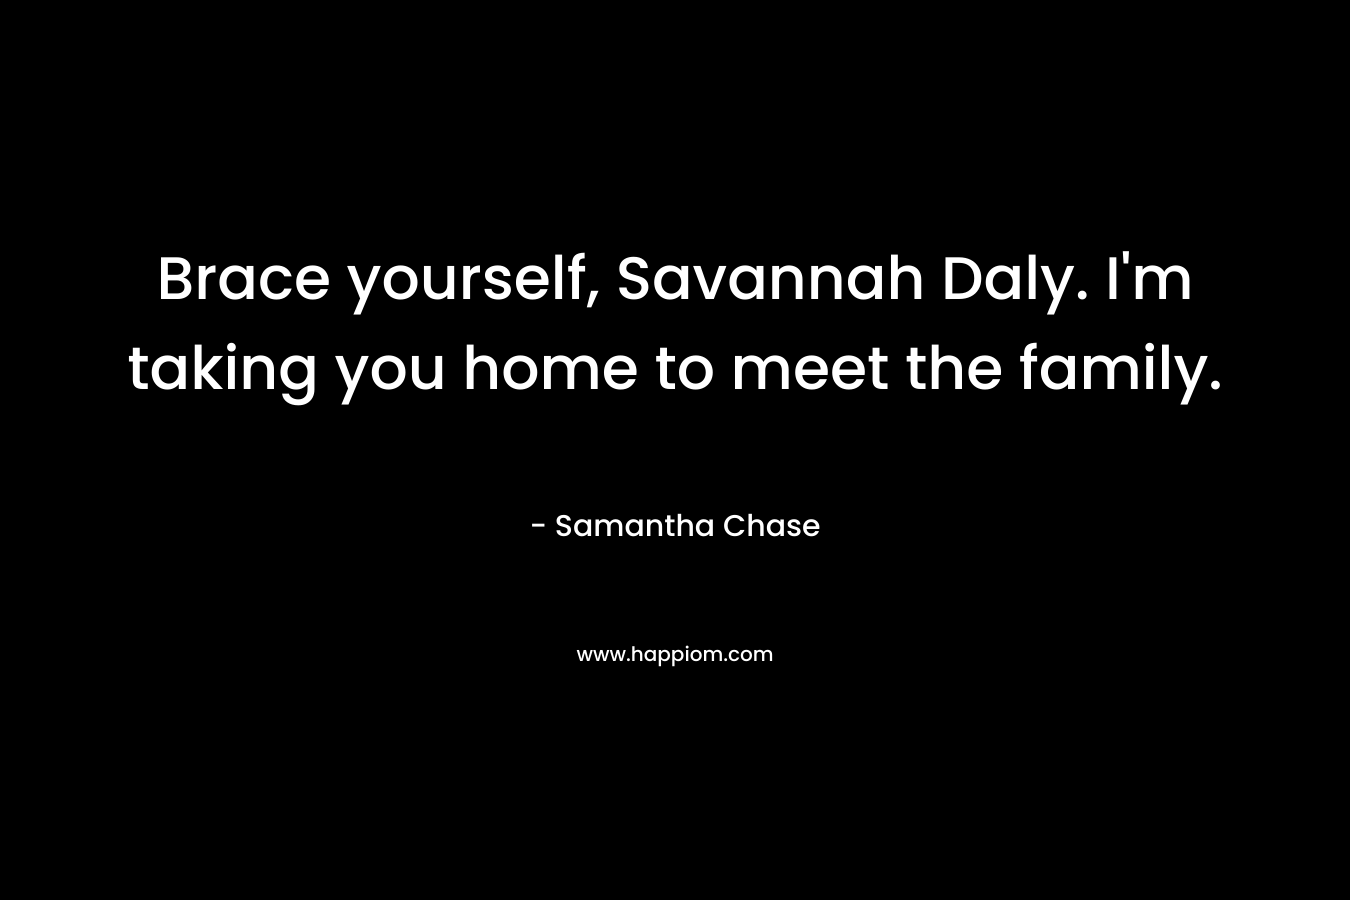 Brace yourself, Savannah Daly. I’m taking you home to meet the family. – Samantha Chase